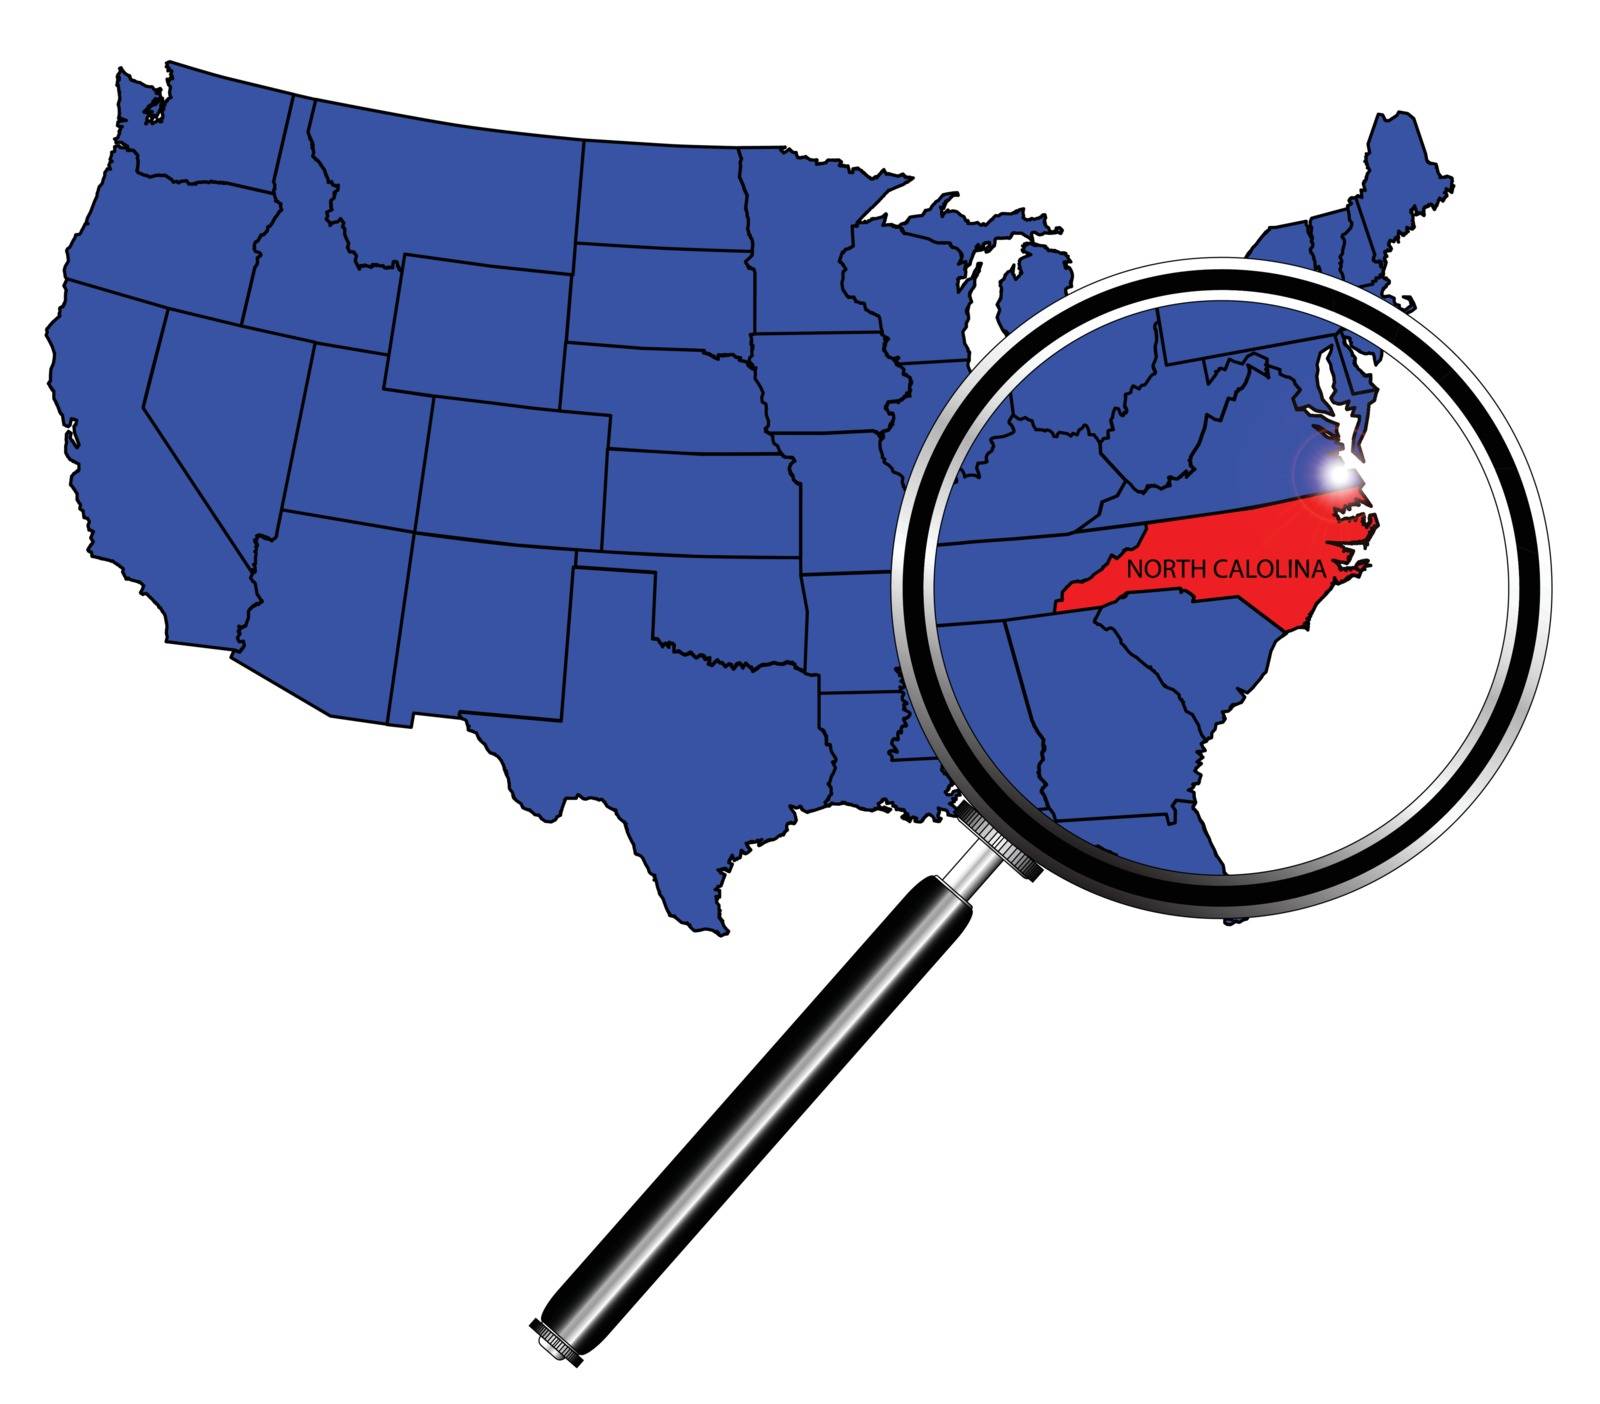 North Carolina state outline set into a map of The United States of America under a magnifying glass